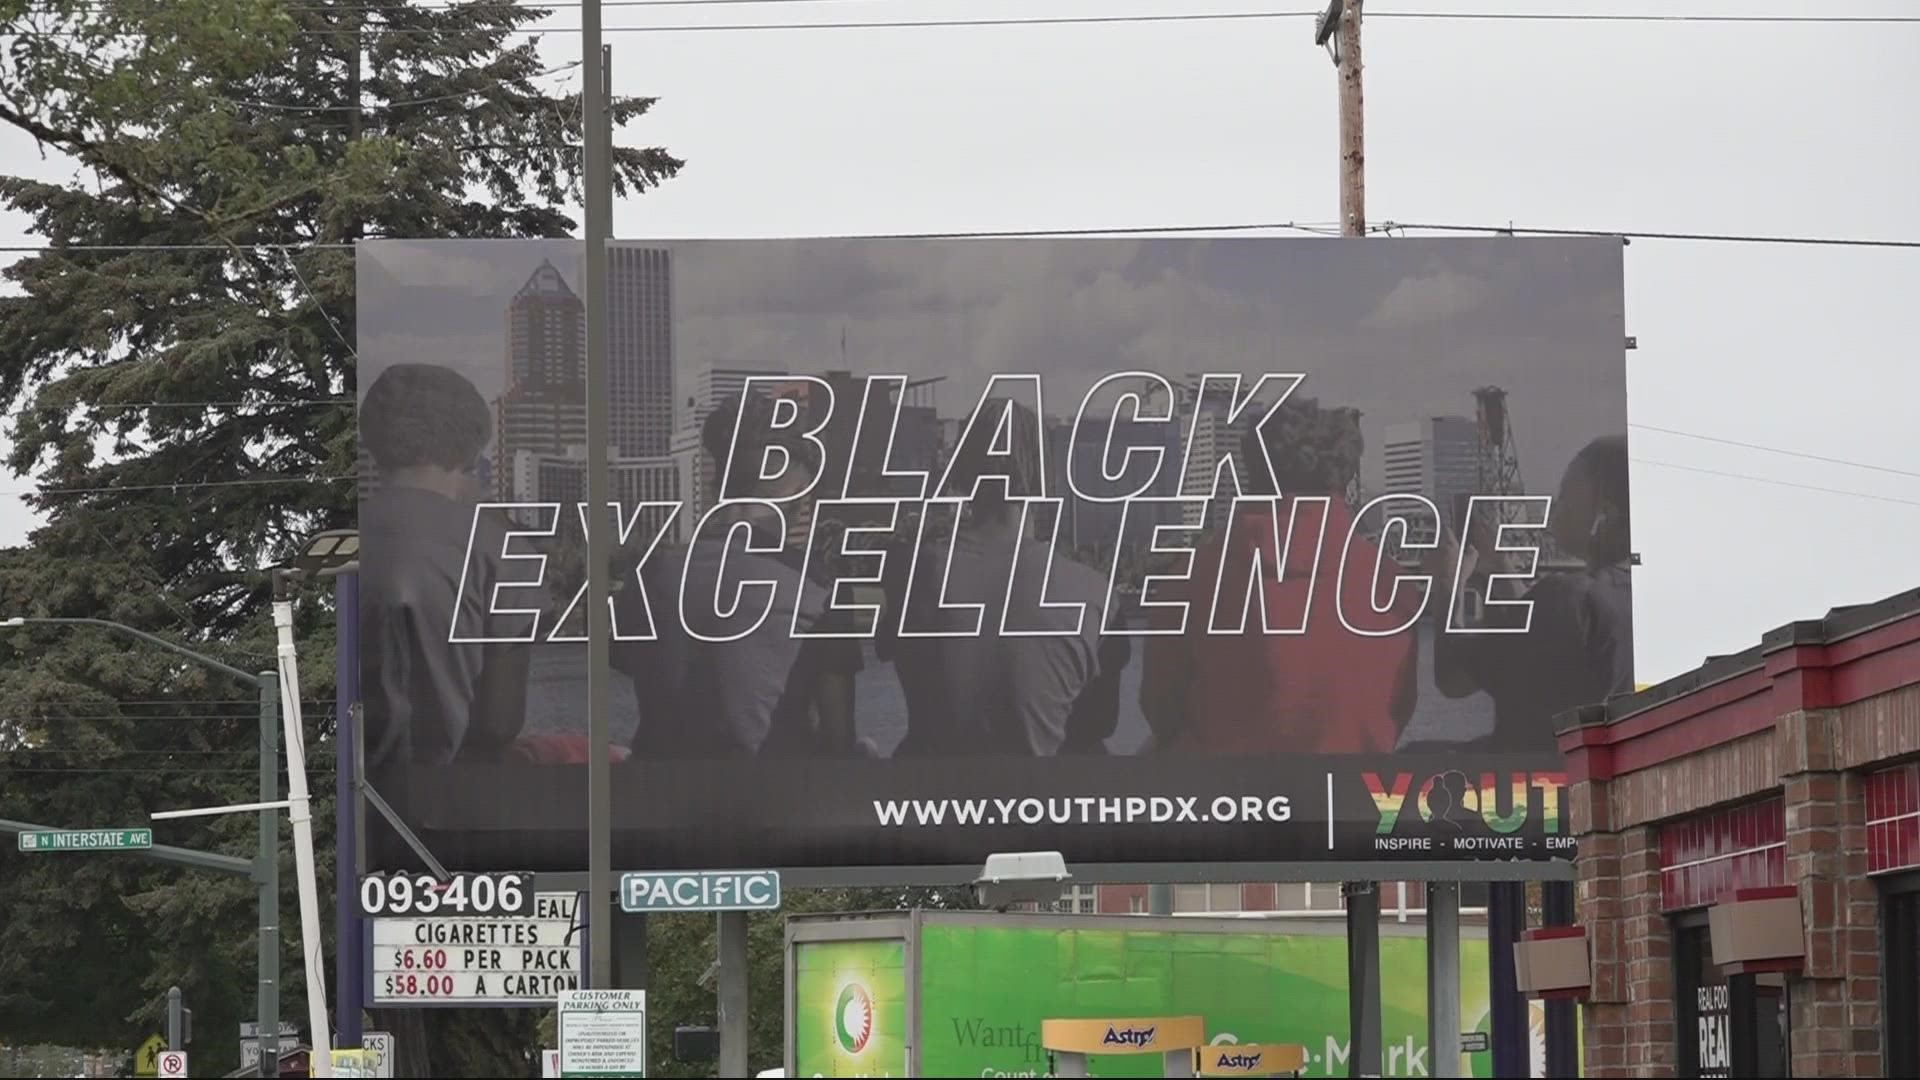 A local nonprofit put up the billboards with the help of a $17,000 grant.